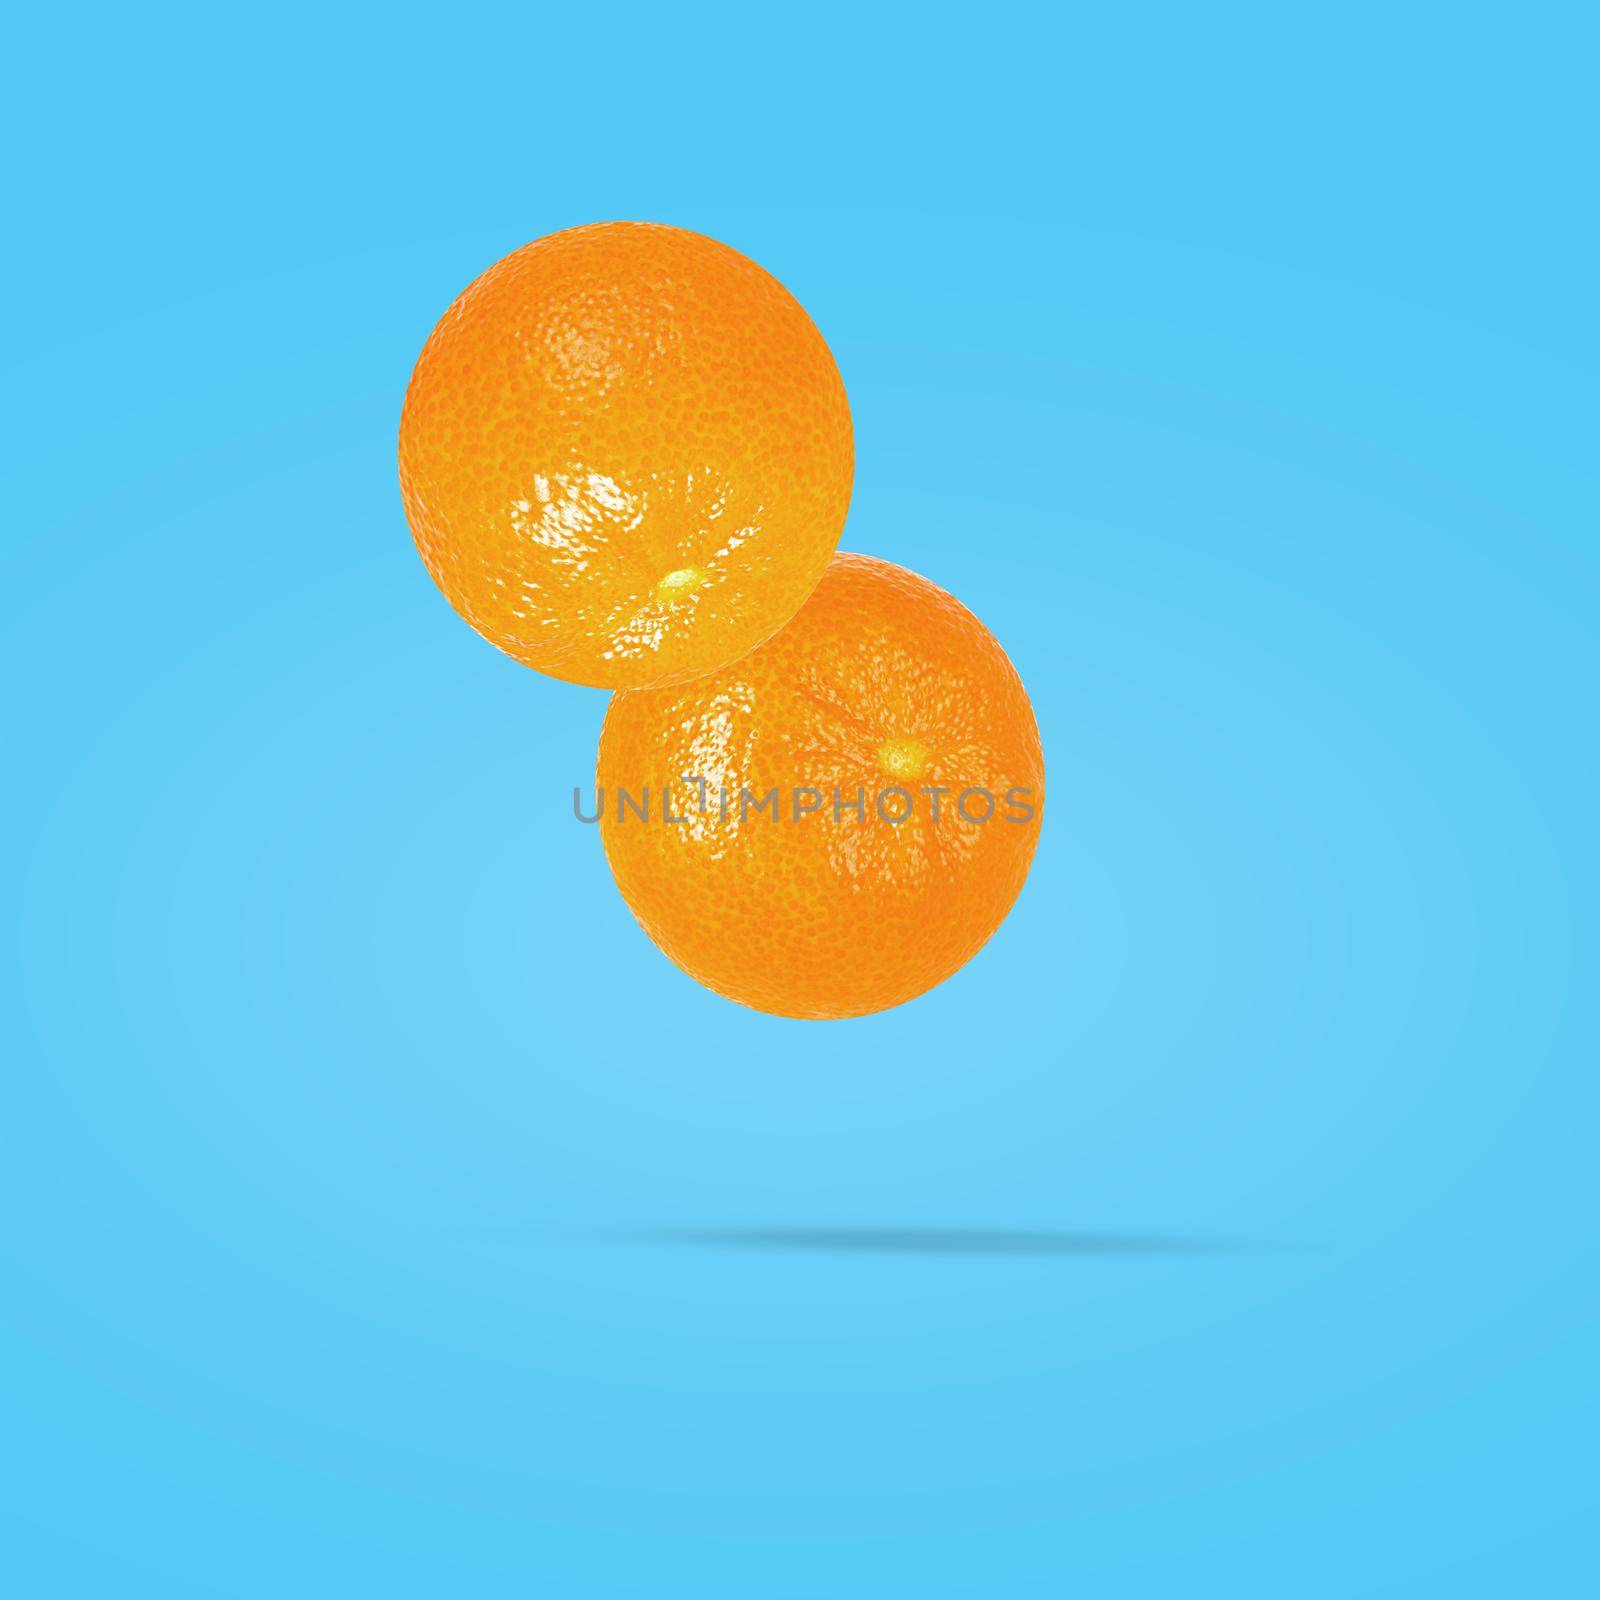 Tangerine fruit on creative colored background with clipping path as package design element by Ciorba